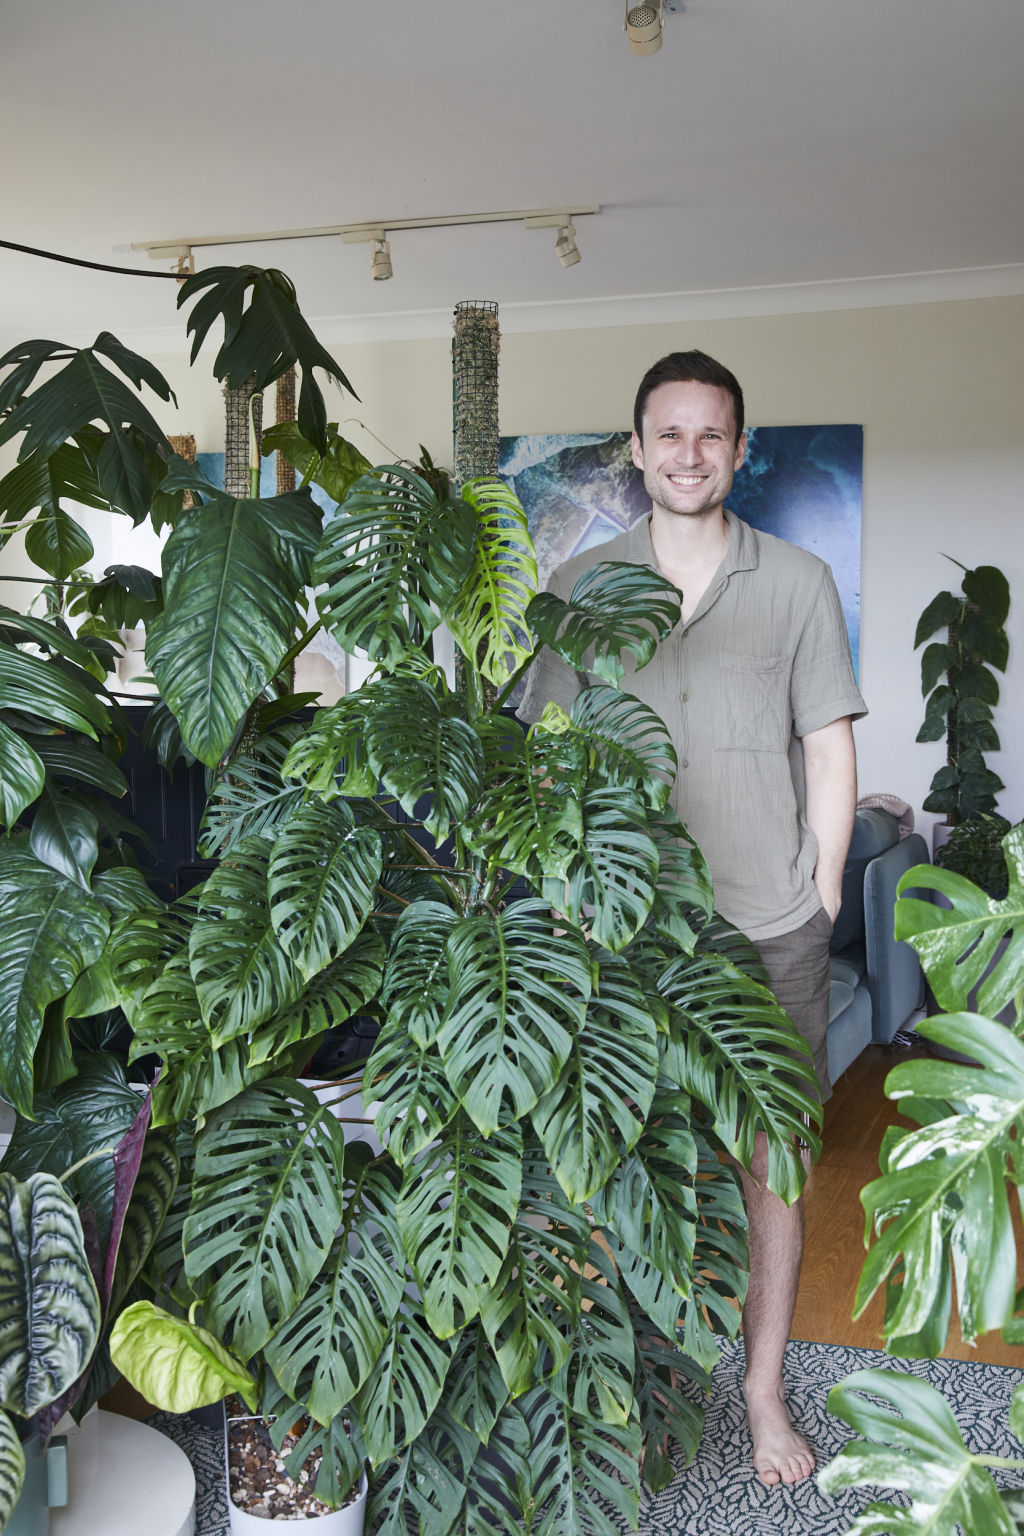 Gettmann studies each of his plants closely and continually assesses how the light, humidity, airflow and temperature in his apartment affect them.